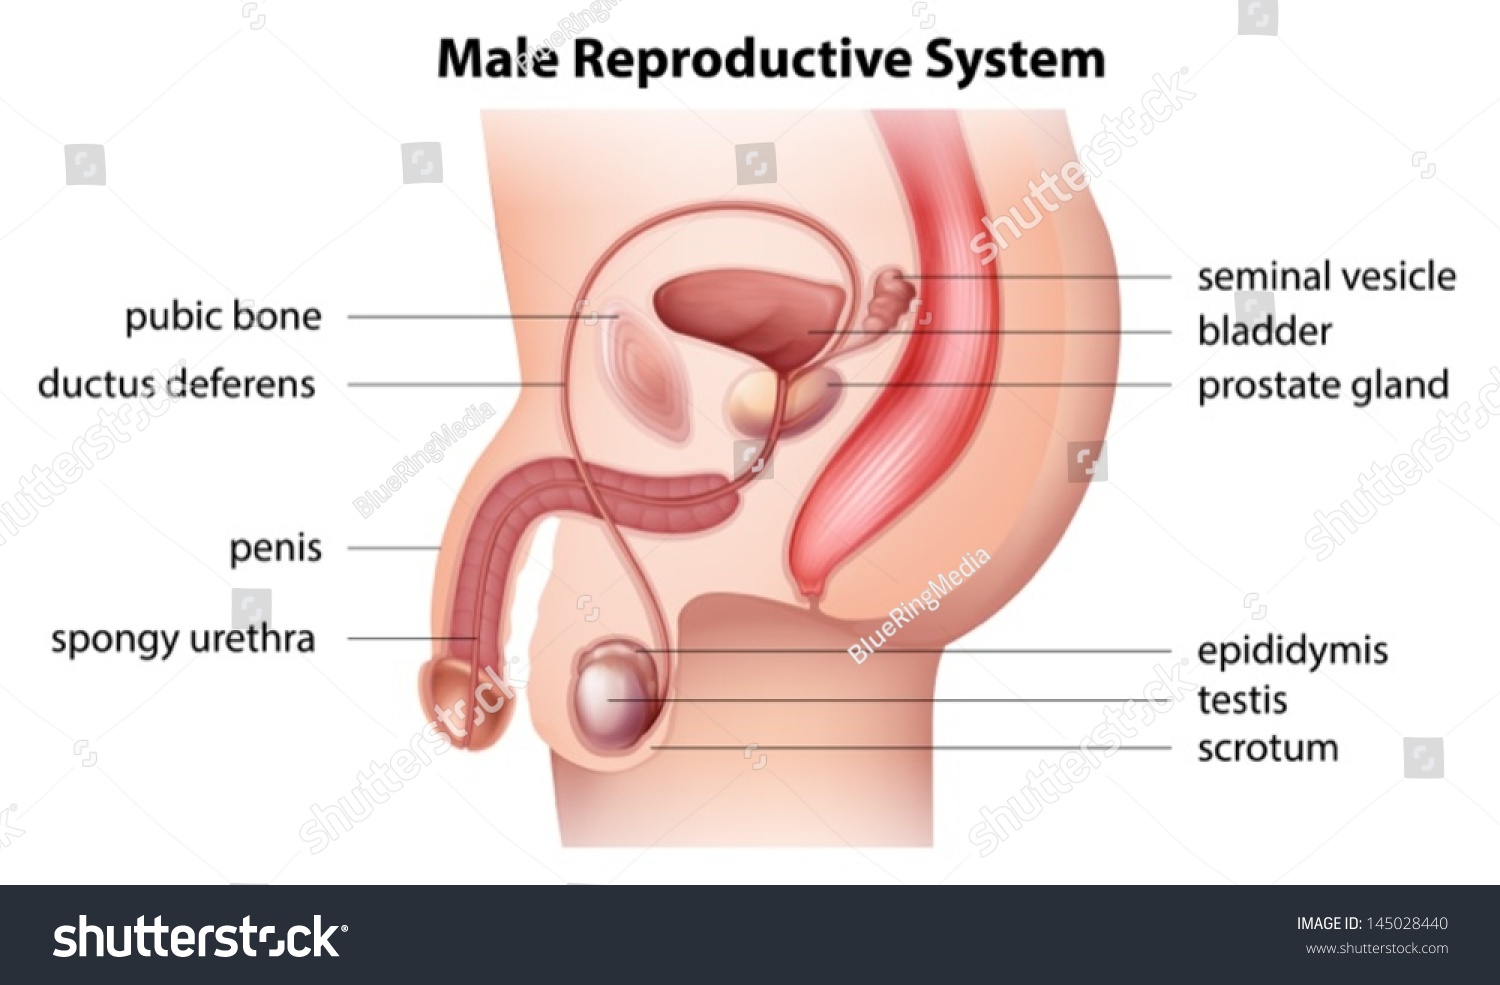 Illustration Showing The Male Reproductive System 145028440 Shutterstock 1227